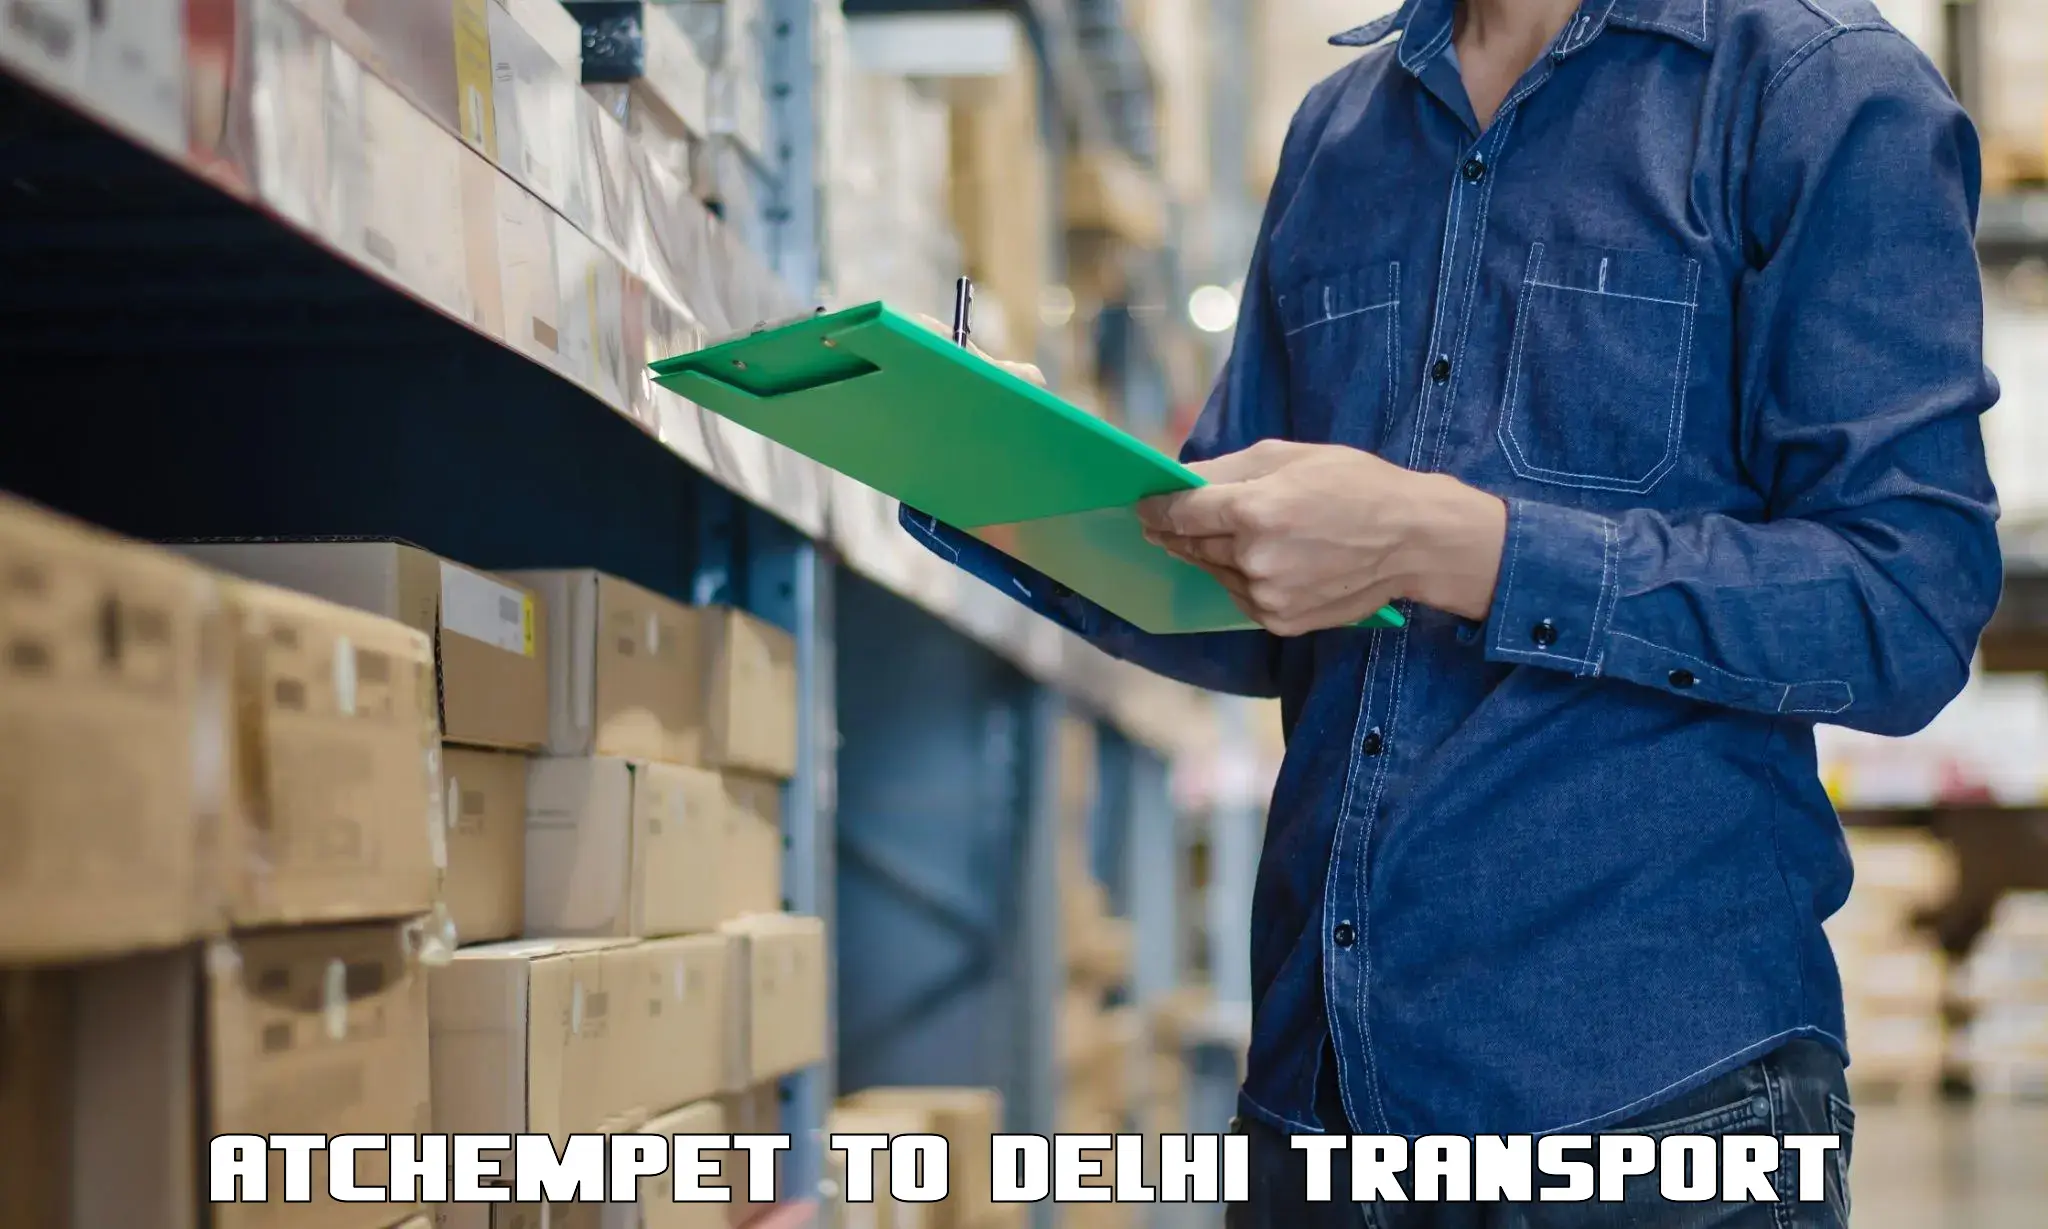 Nationwide transport services Atchempet to East Delhi